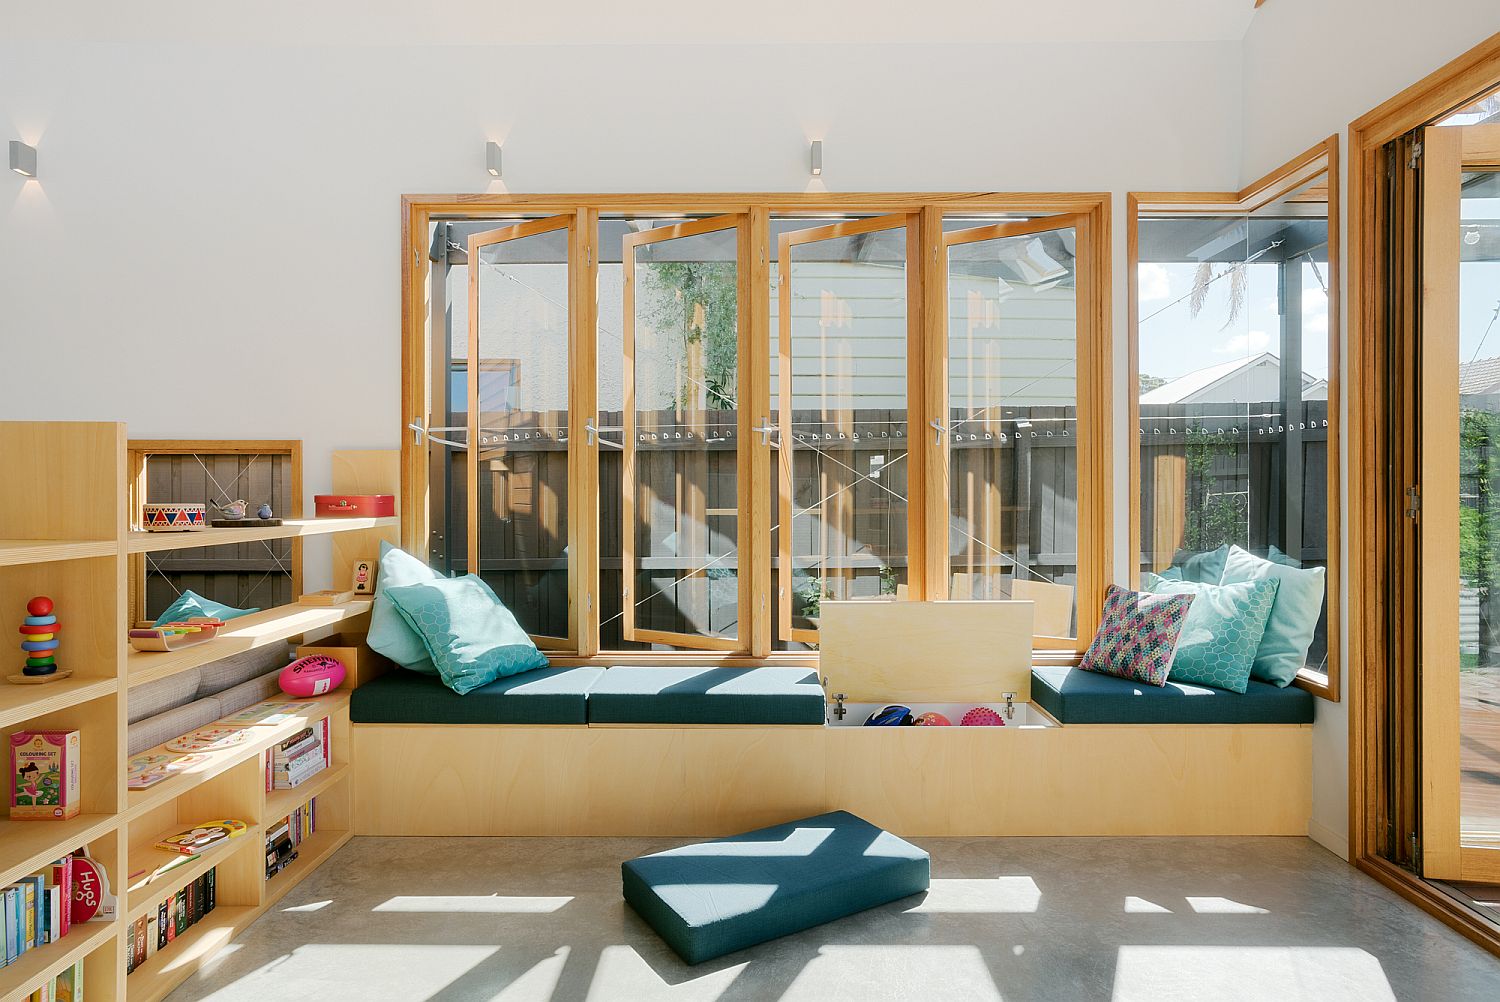 Goregous-seating-next-to-the-window-with-built-in-storage-serves-in-multiple-ways